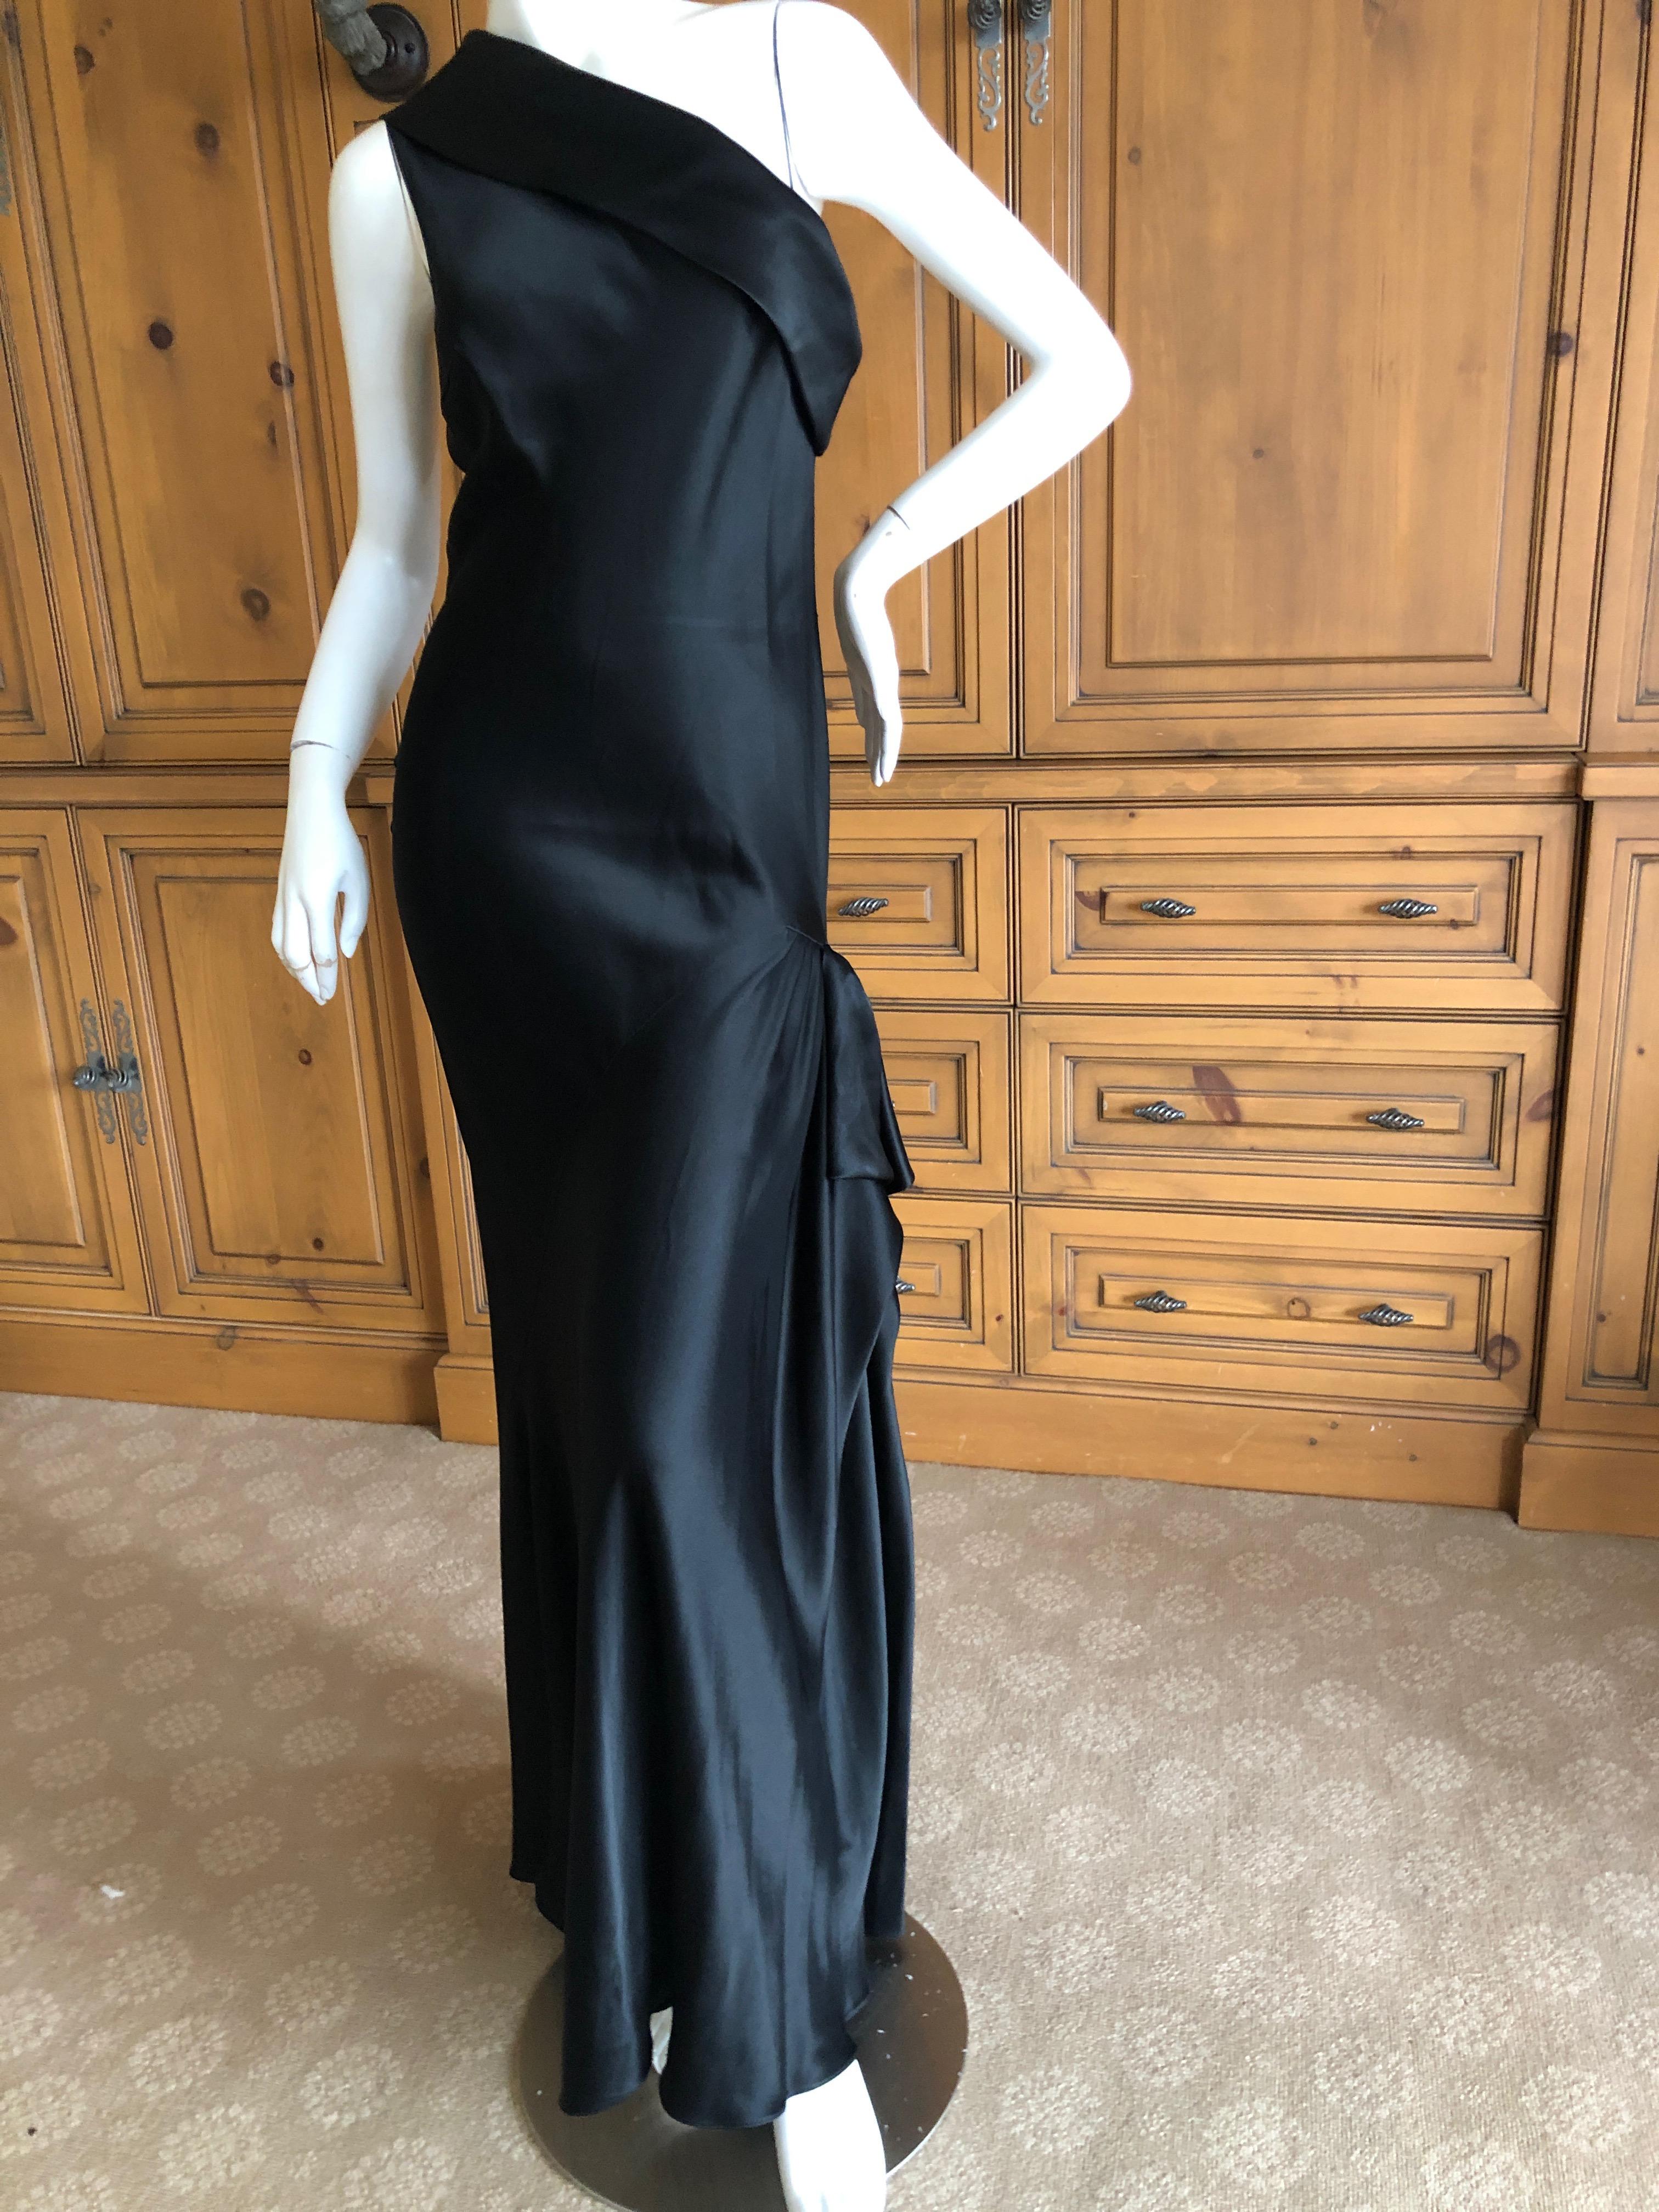 John Galliano Black Bias Cut One Shoulder Draped 1990's Evening Dress 40 In Excellent Condition For Sale In Cloverdale, CA